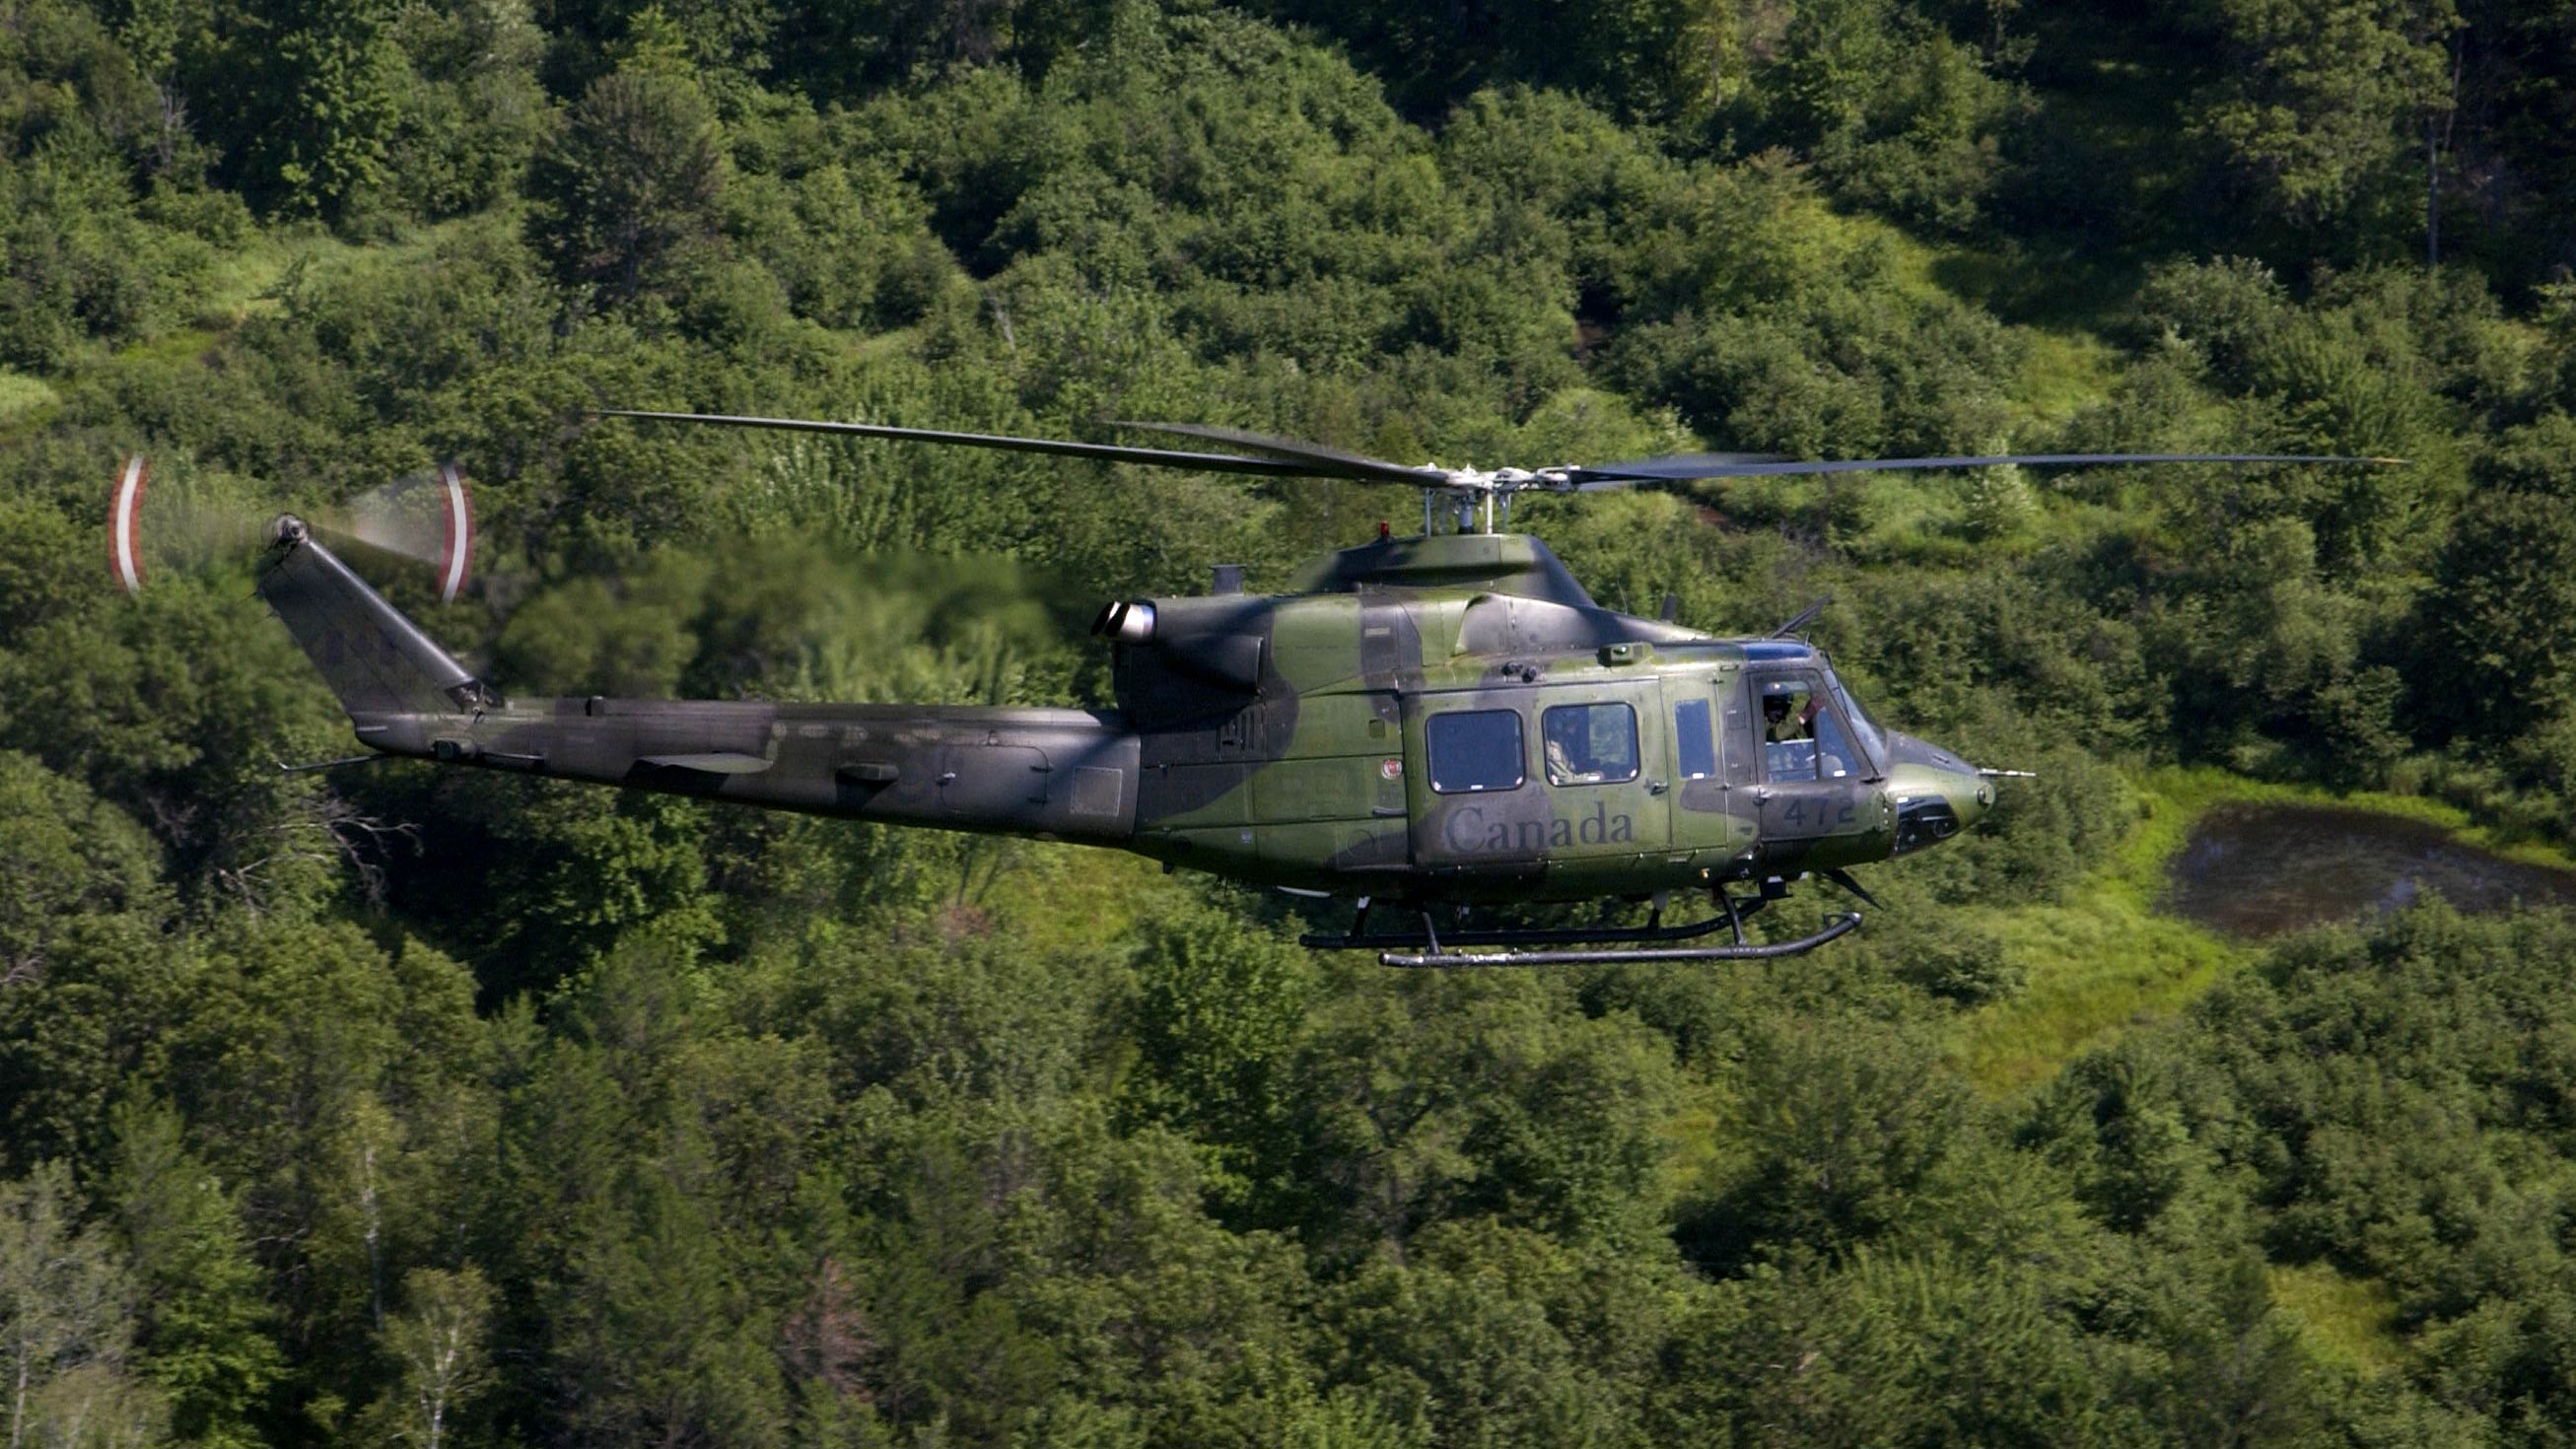 Canadian Air Force CH-146 Griffon helicopter